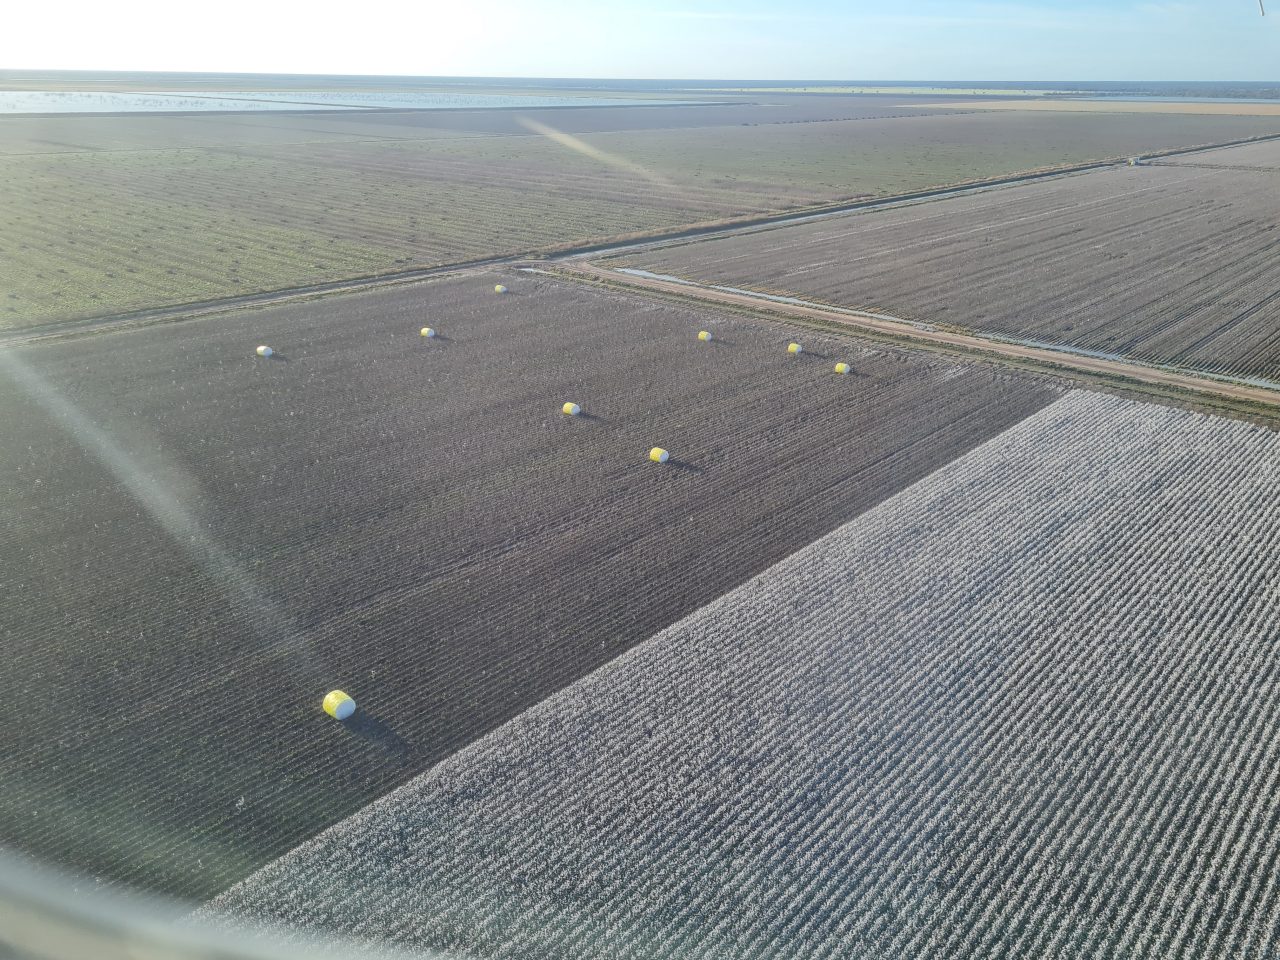 Aerial photo of cotton fields, some harvested with a couple of bales still remaining, some not harvested yet, others still in growing phase.  Landscape is very flat out to the horizon